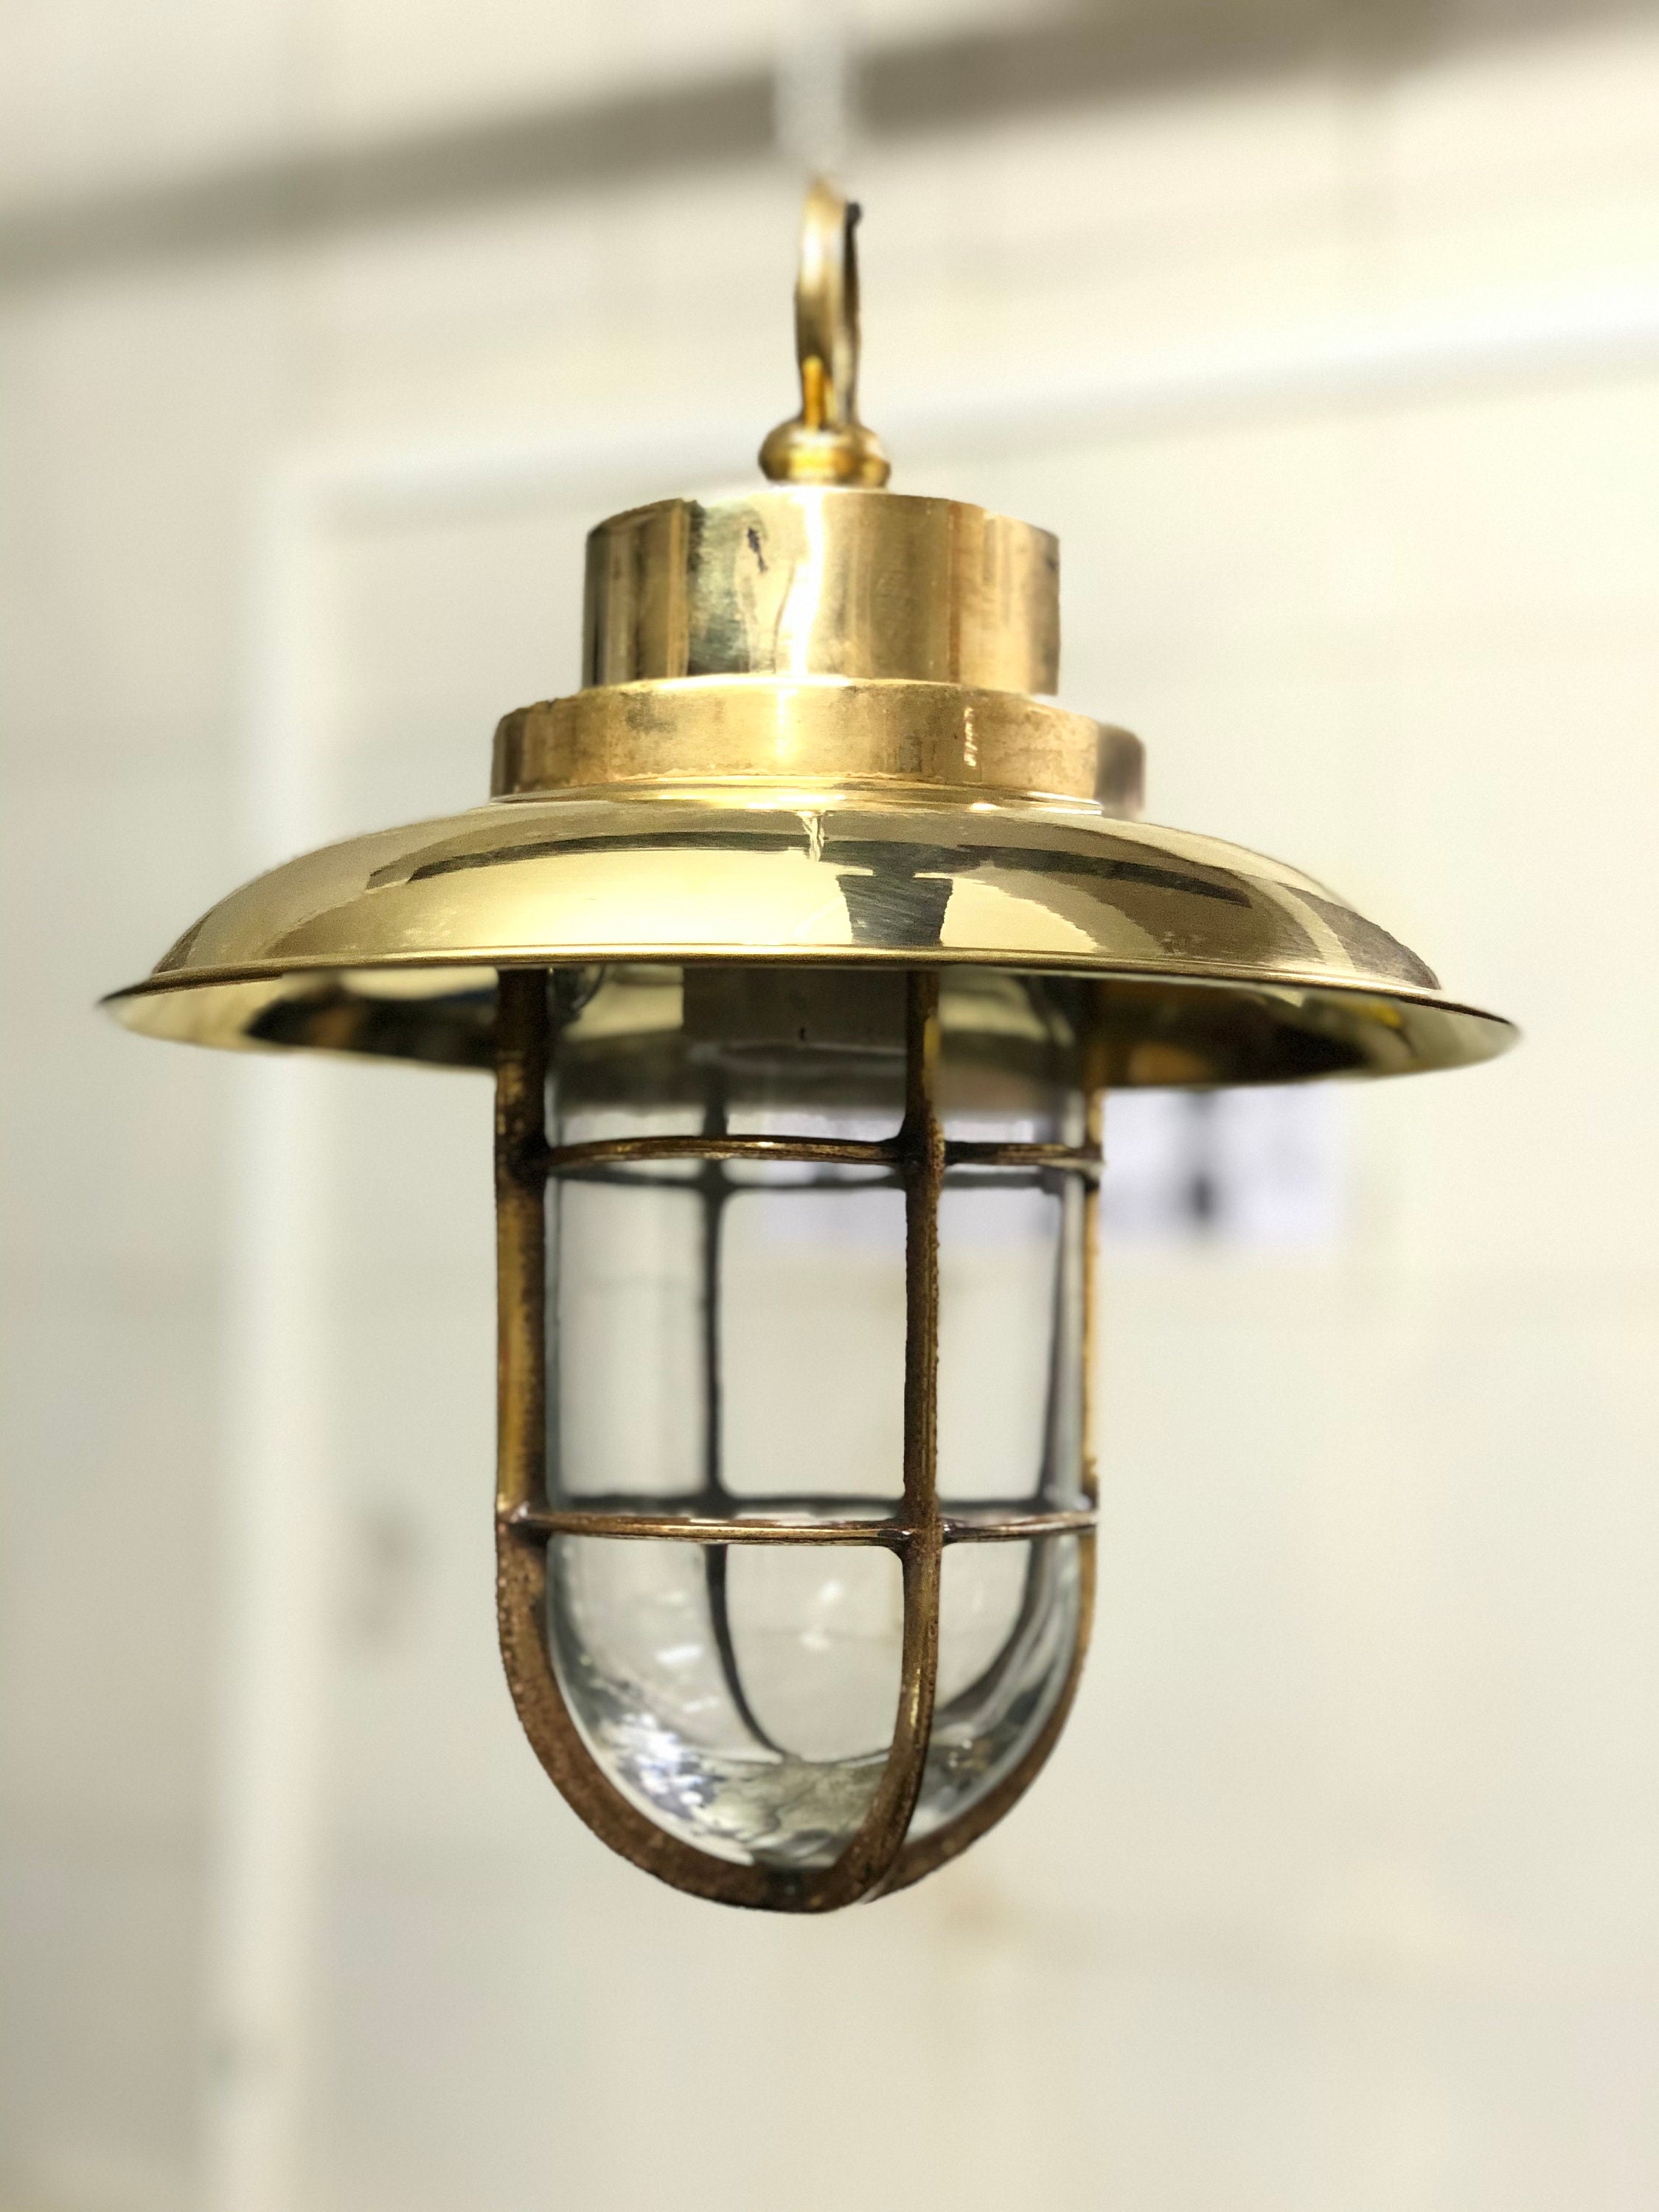 AUTHENTIC OLD ANTIQUE SALVAGE BRASS NAUTICAL SHIP WALL MOUNT CEILING LIGHT/SHADE 